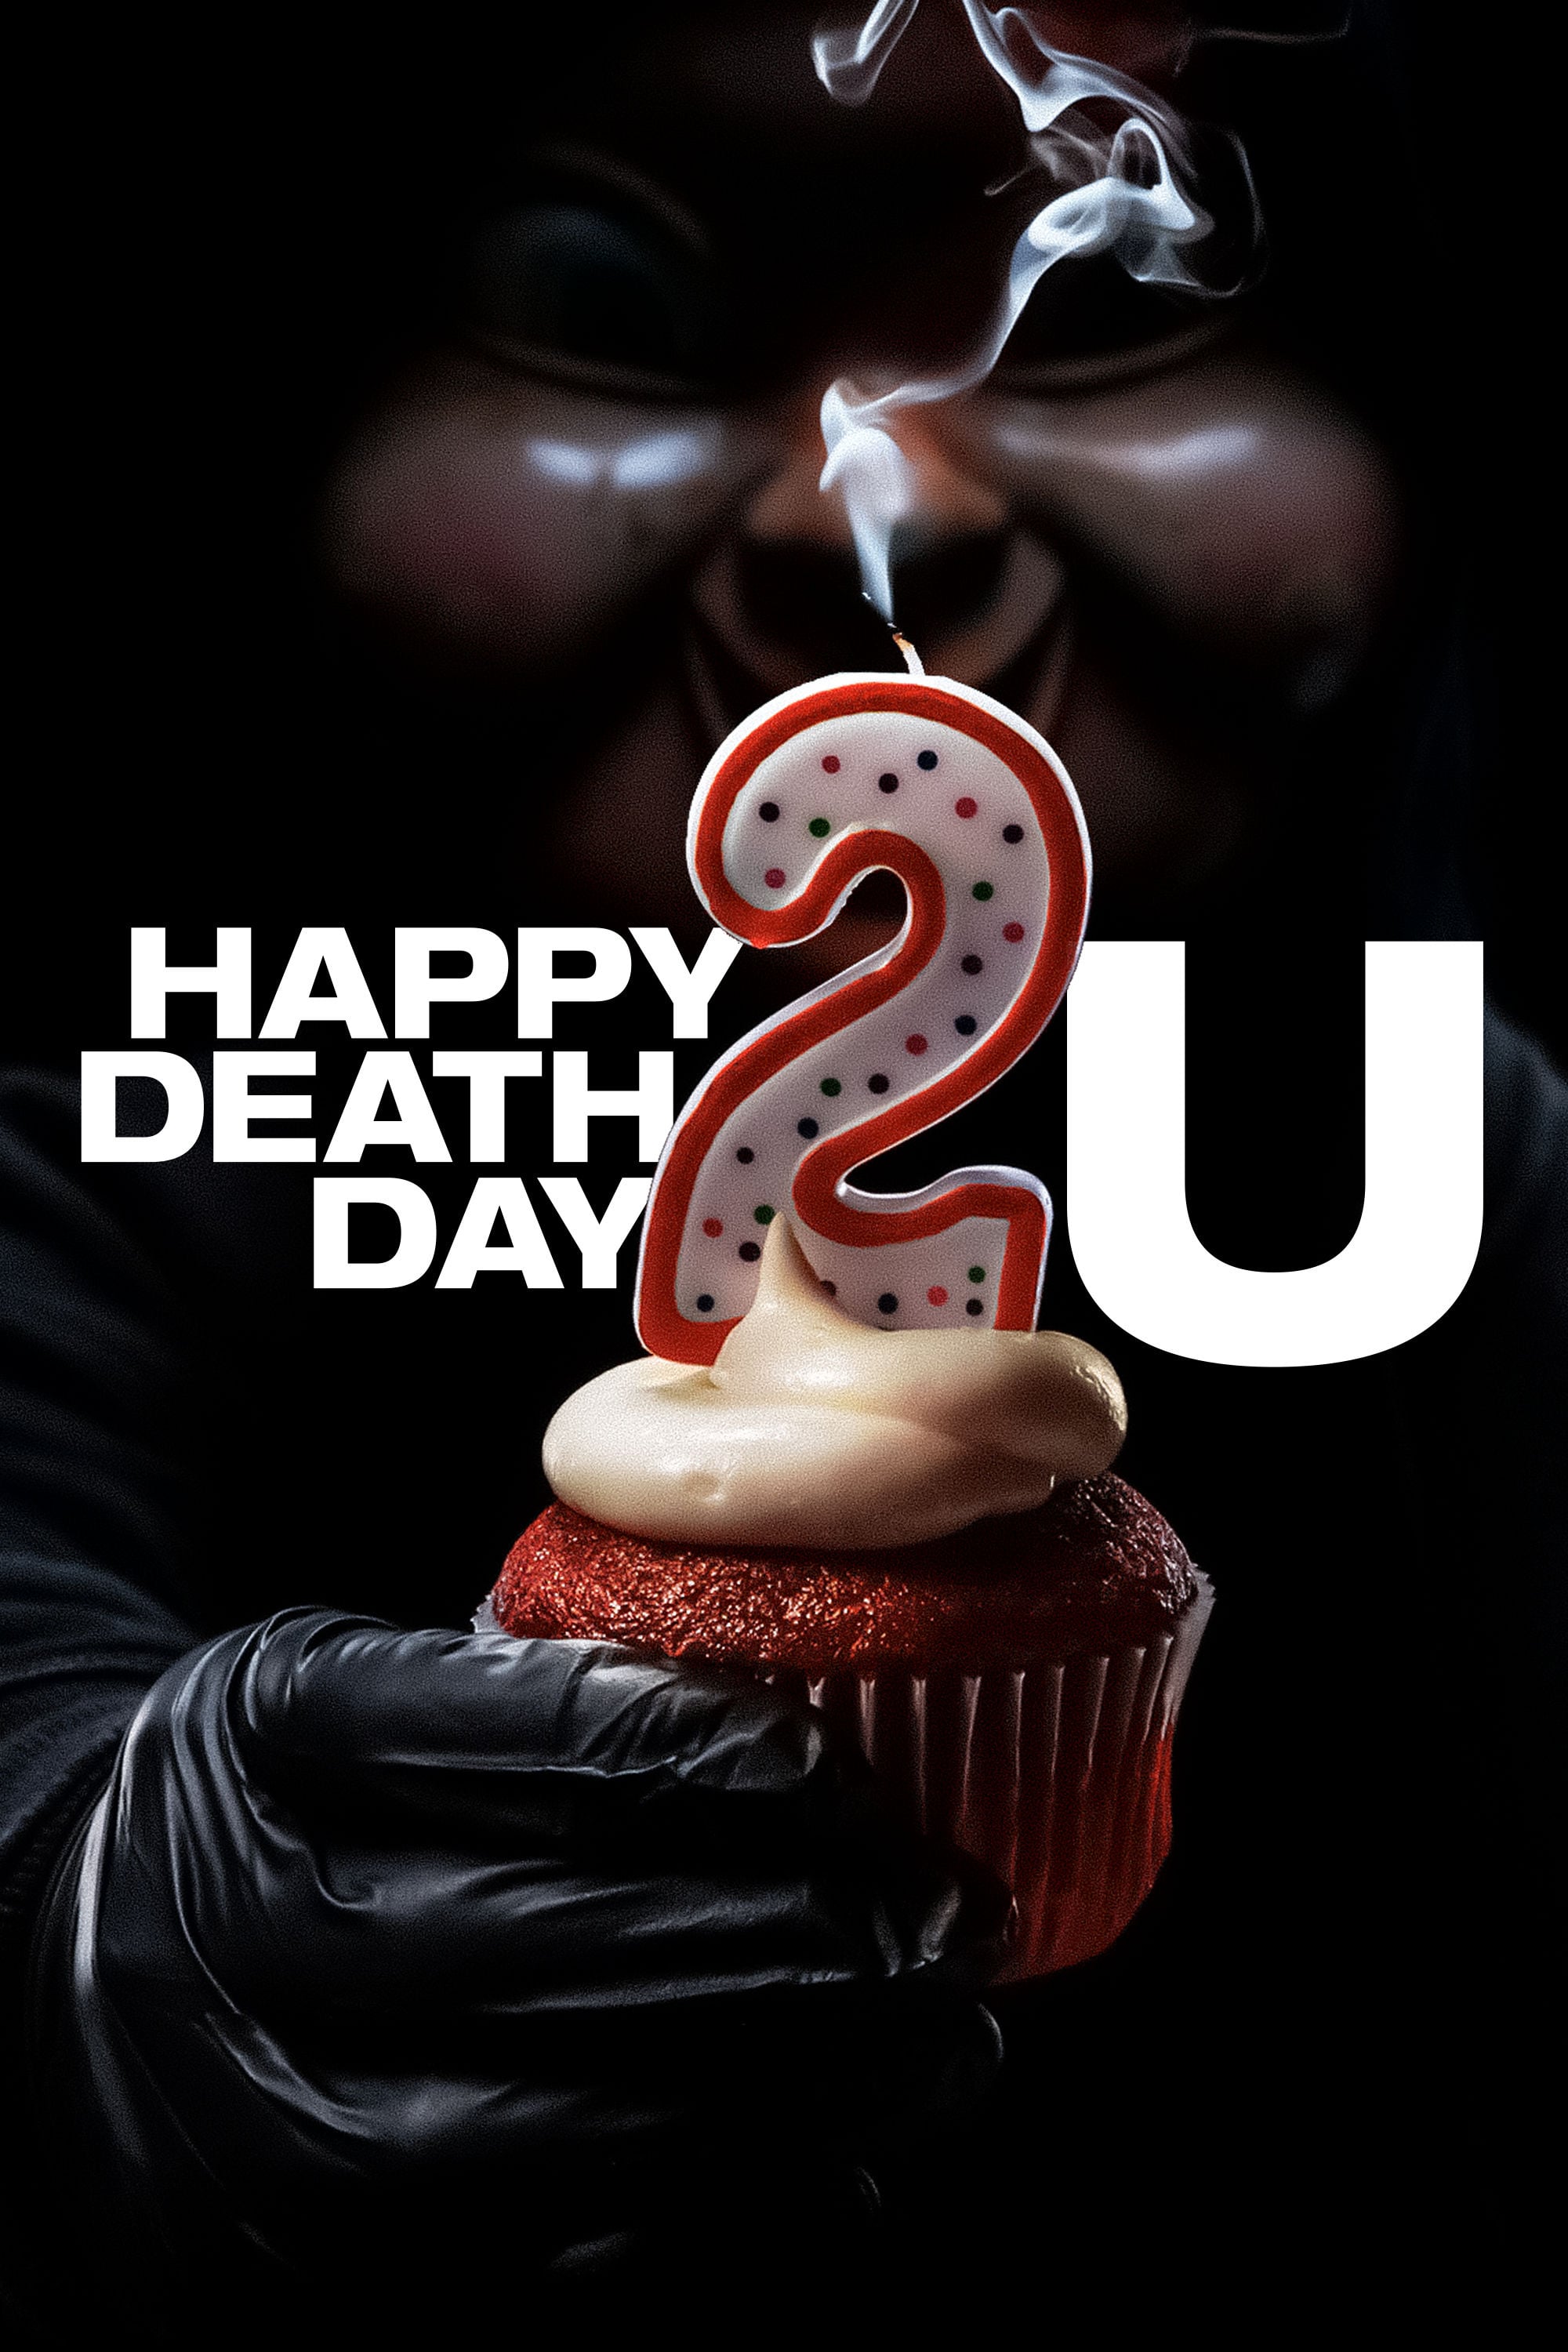 Poster for the movie "Happy Death Day 2U"